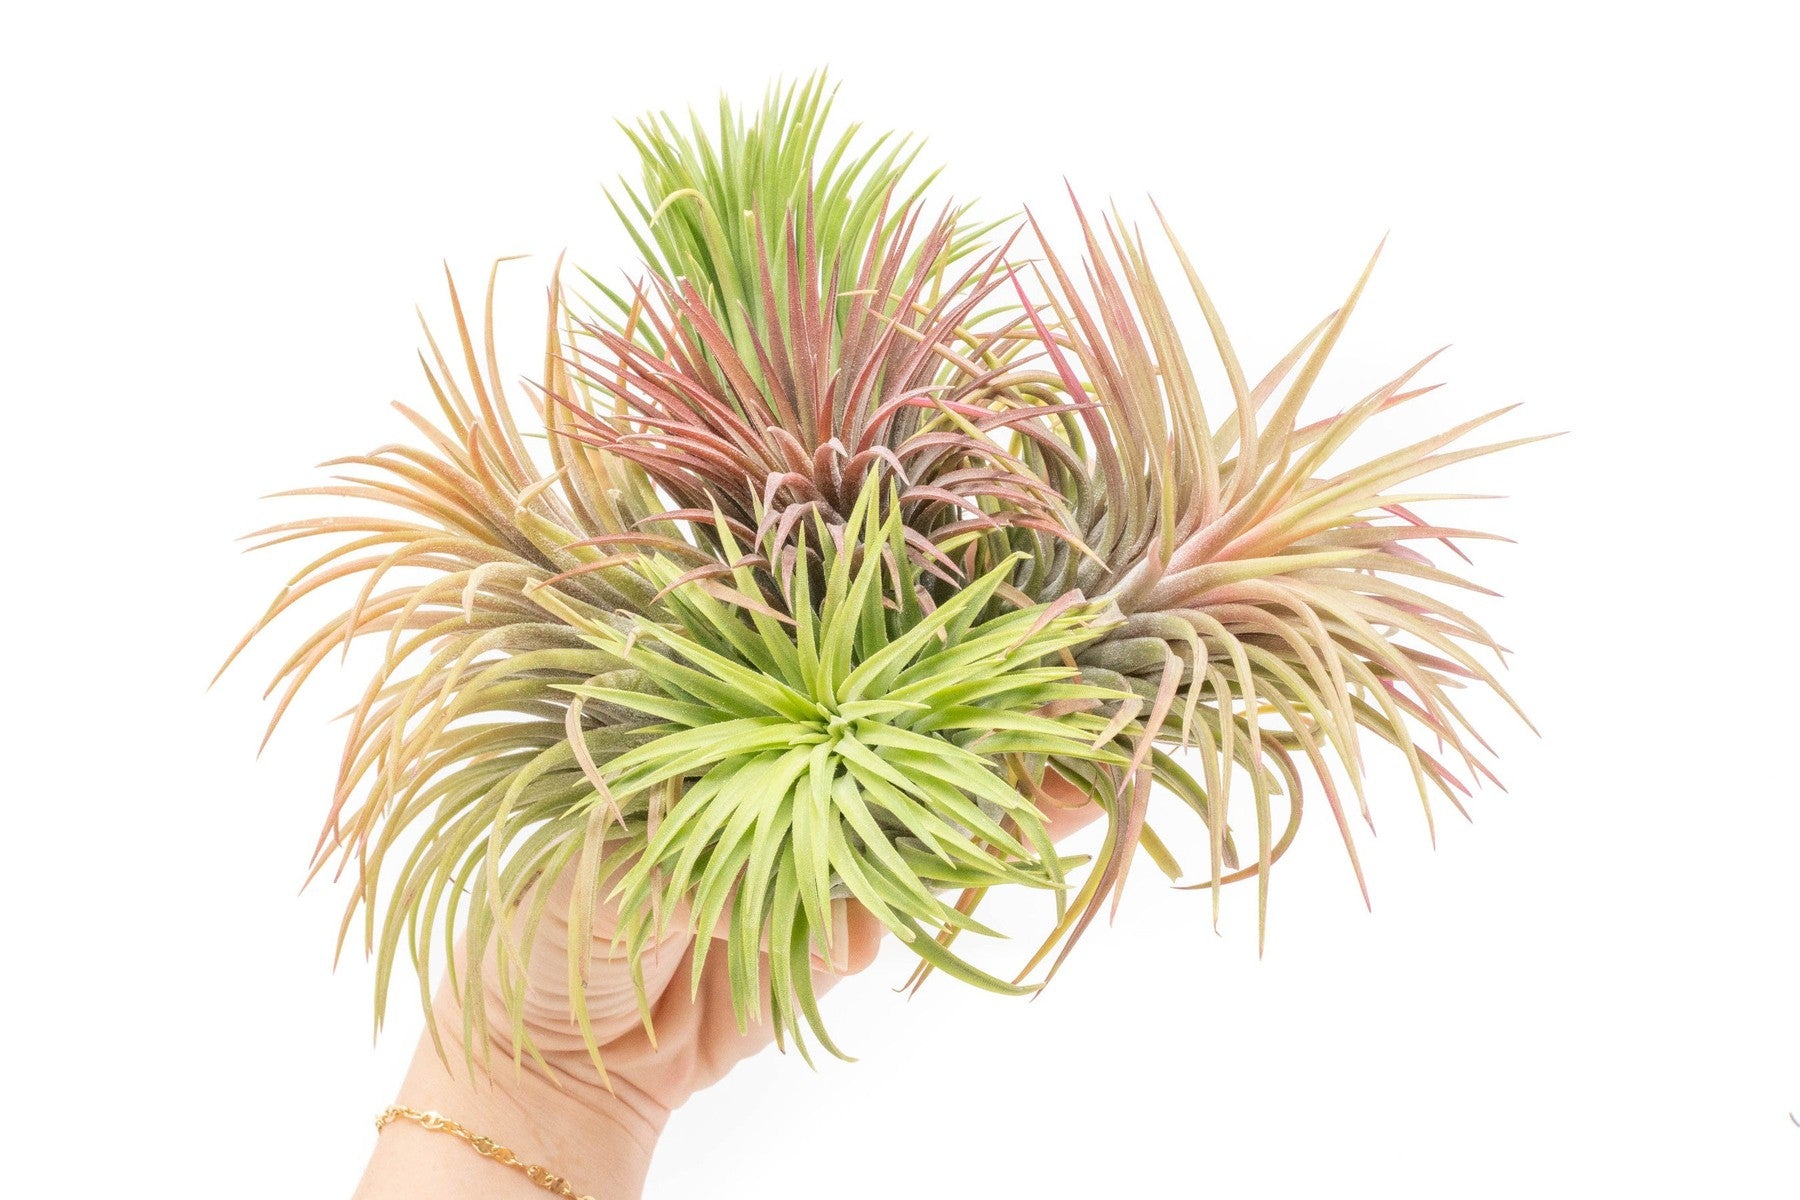 SALE - XL Tillandsia Ionantha Rubra Air Plants - Set of 10 or 20 - 40% Off-airplant-The Succulent Source